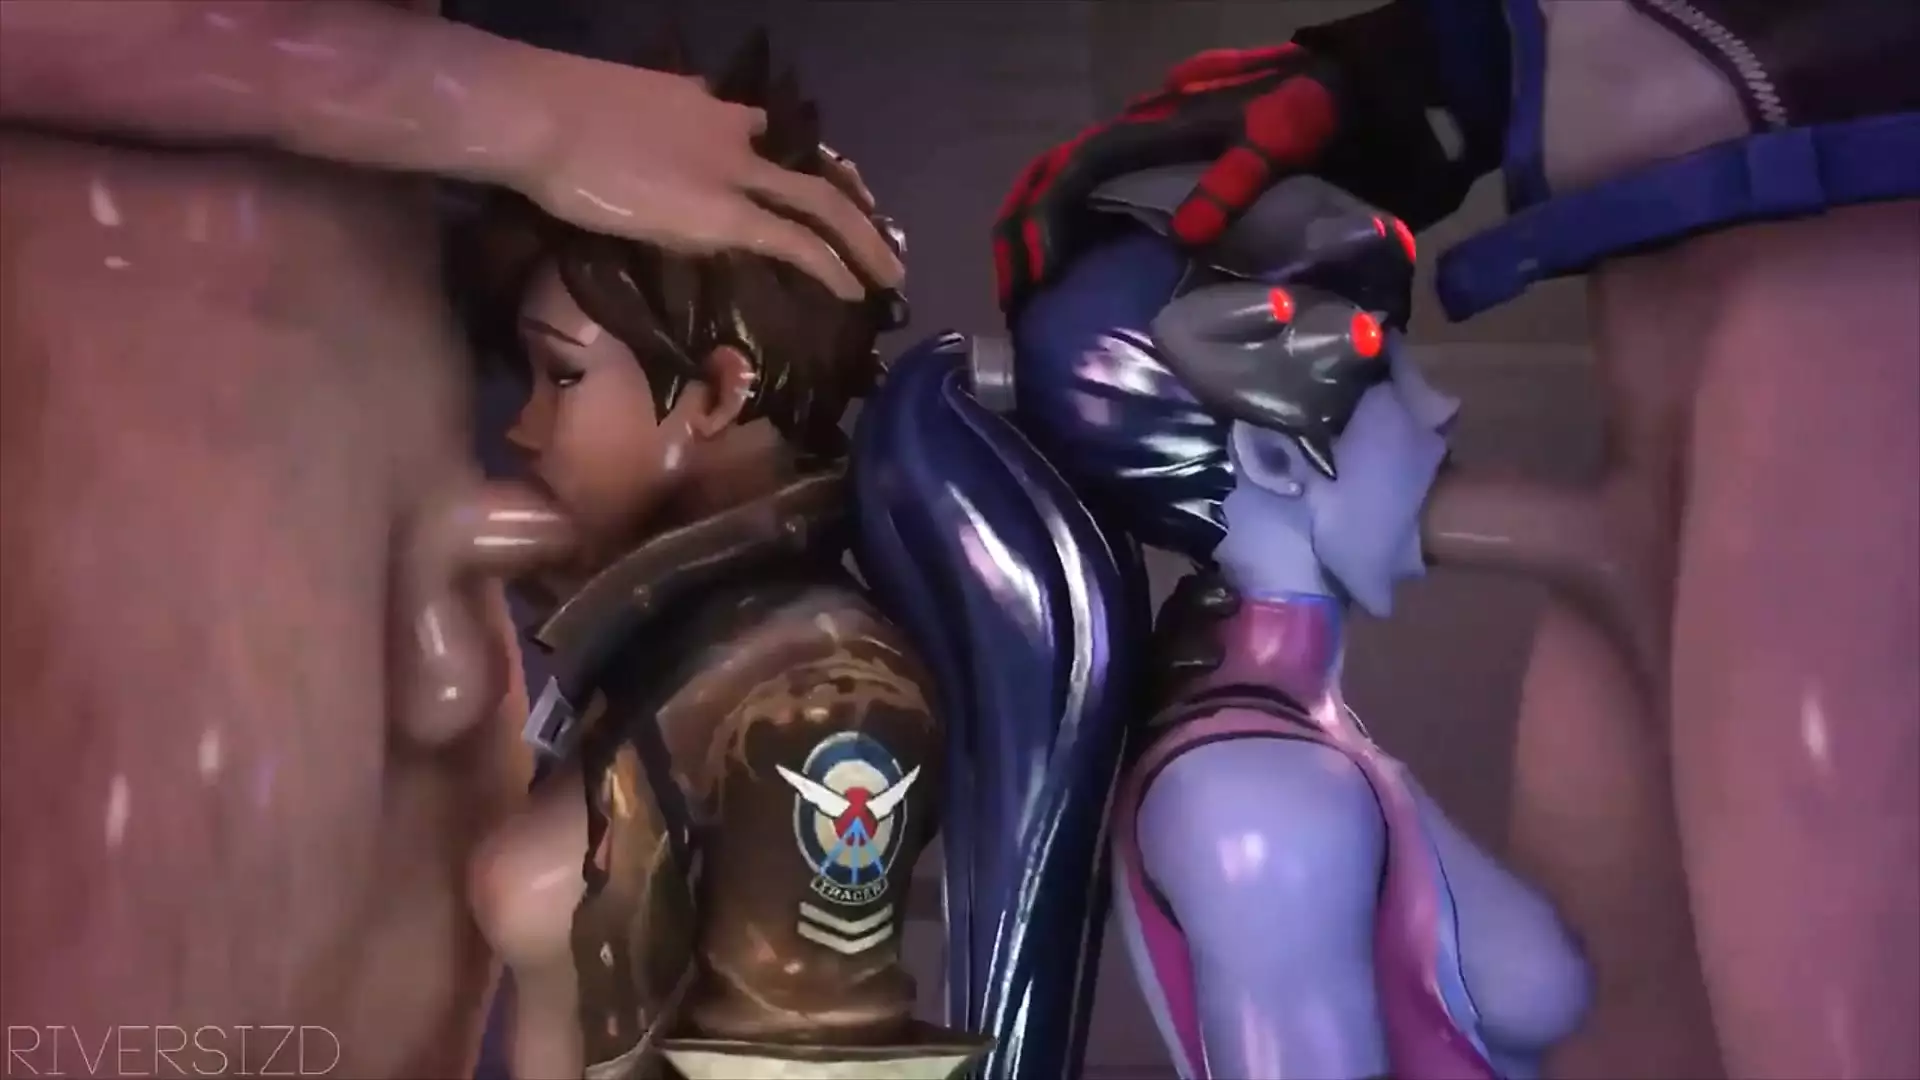 Widowmaker and Tracer Both Getting Face Fucked Hard